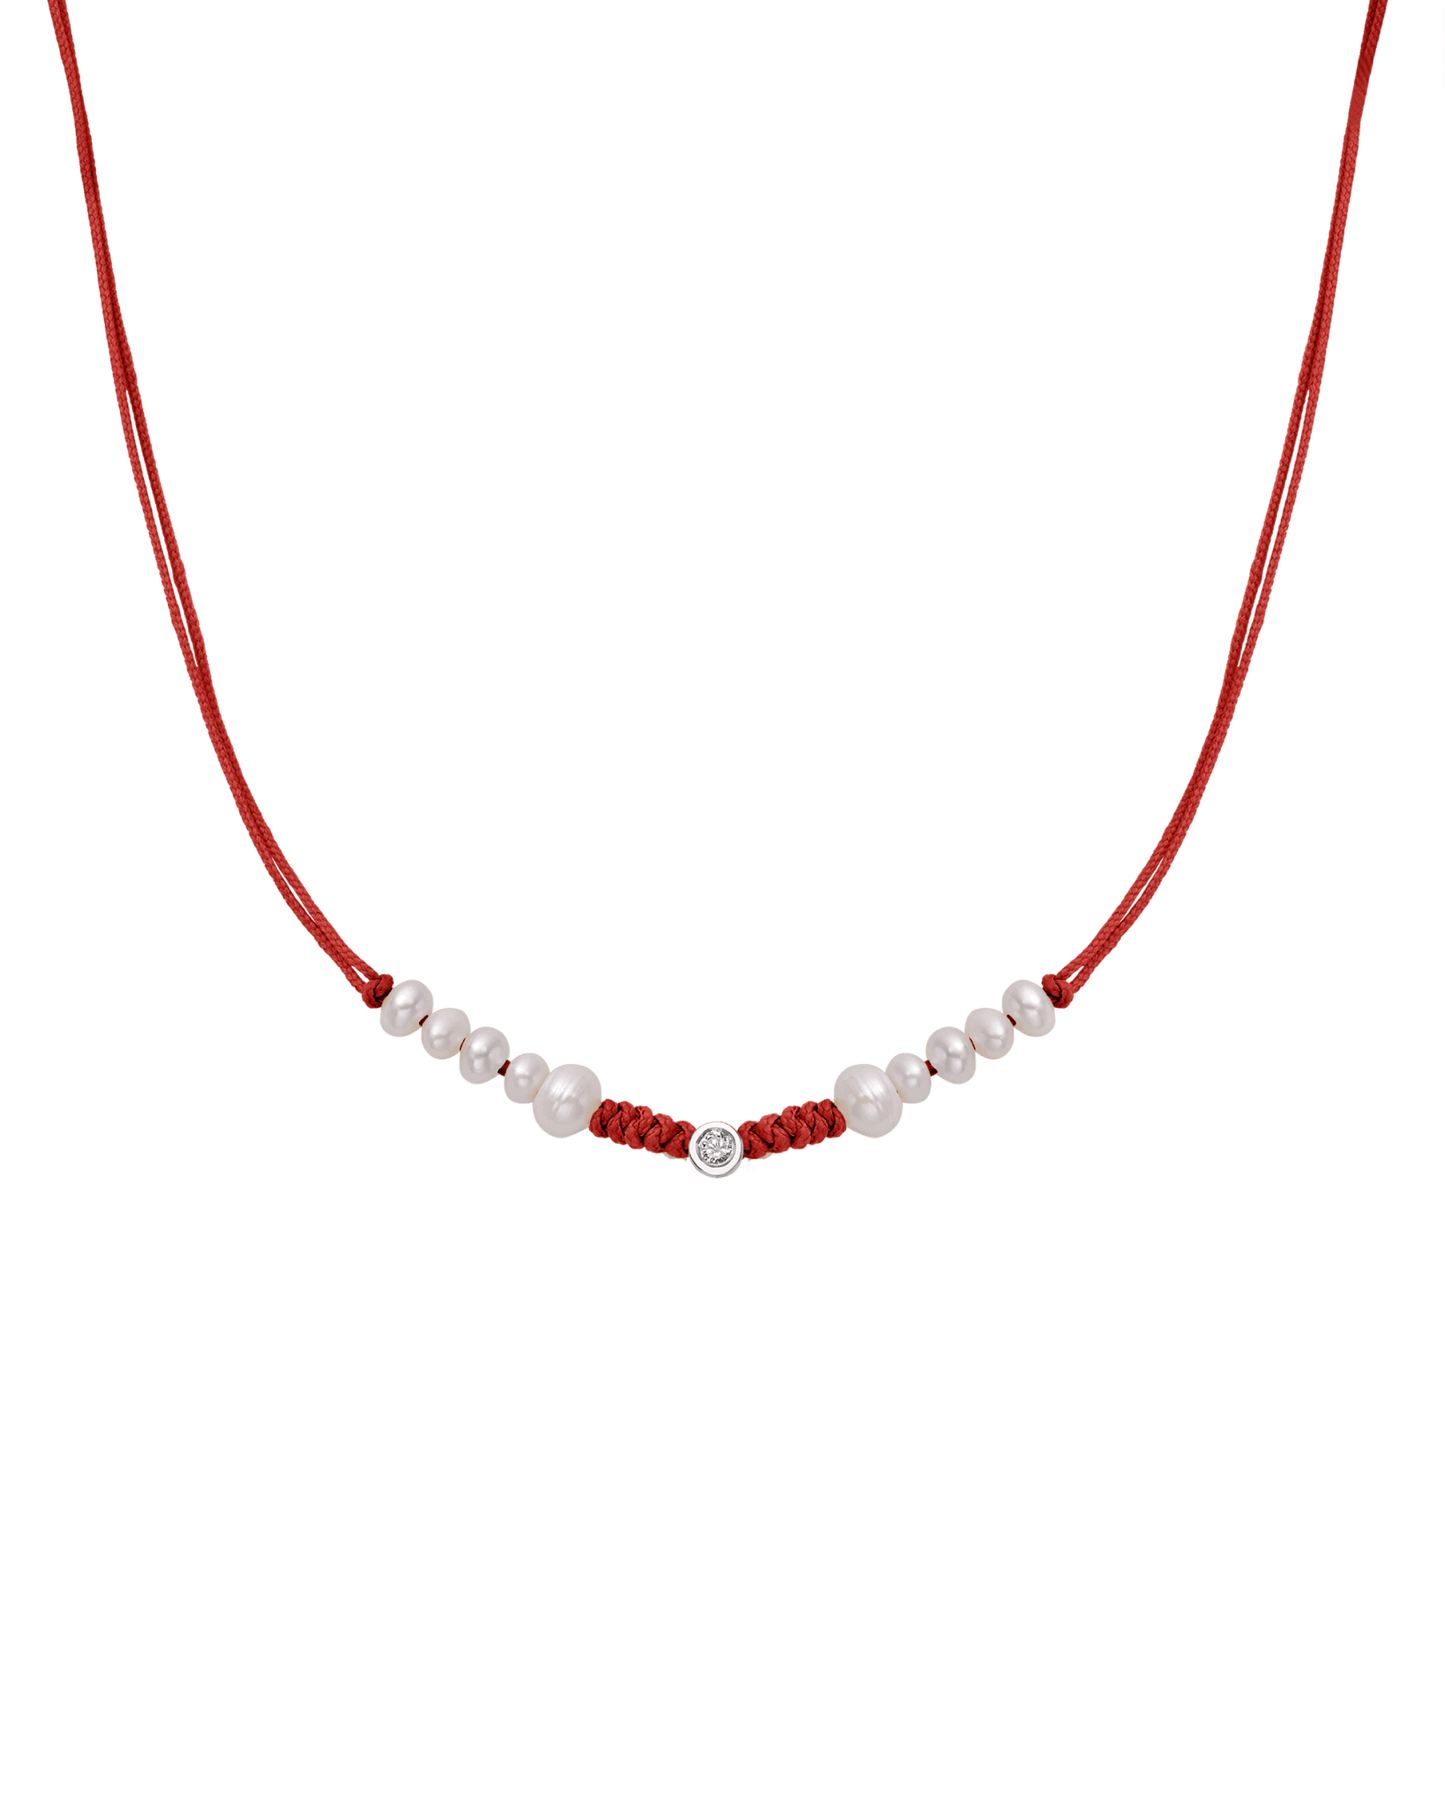 Ten Natural Pearl String of Love Necklace - 14K White Gold Necklaces 14K Solid Gold Red Medium: 0.04ct 